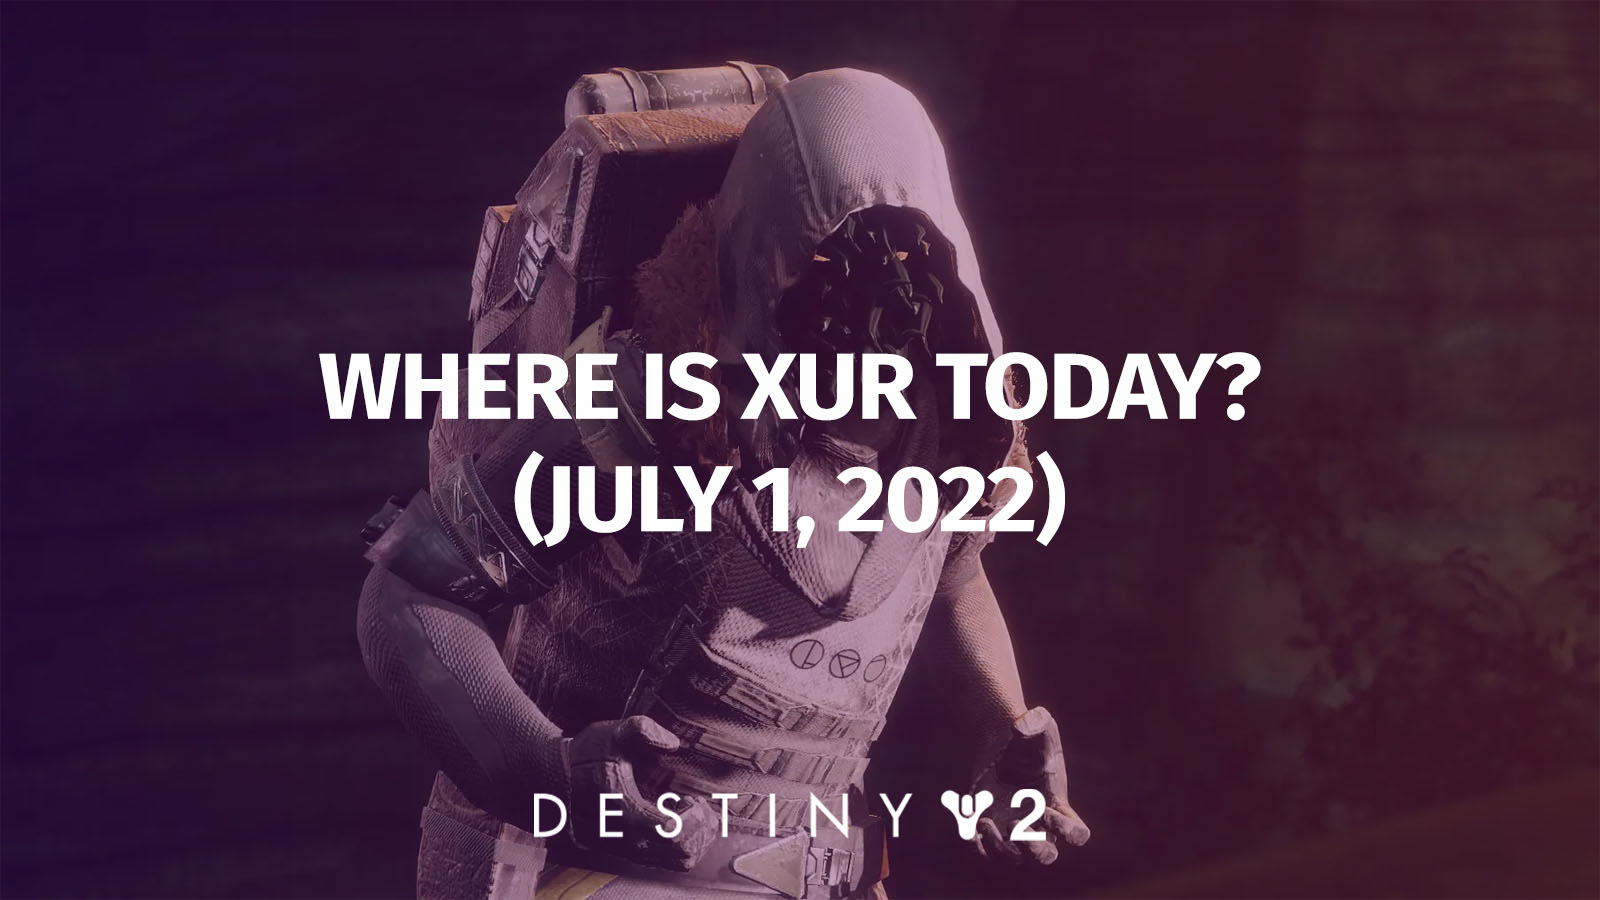 Destiny 2: Where Is Xur Today? Exotic Inventory (July 1 – July 4, 2022)